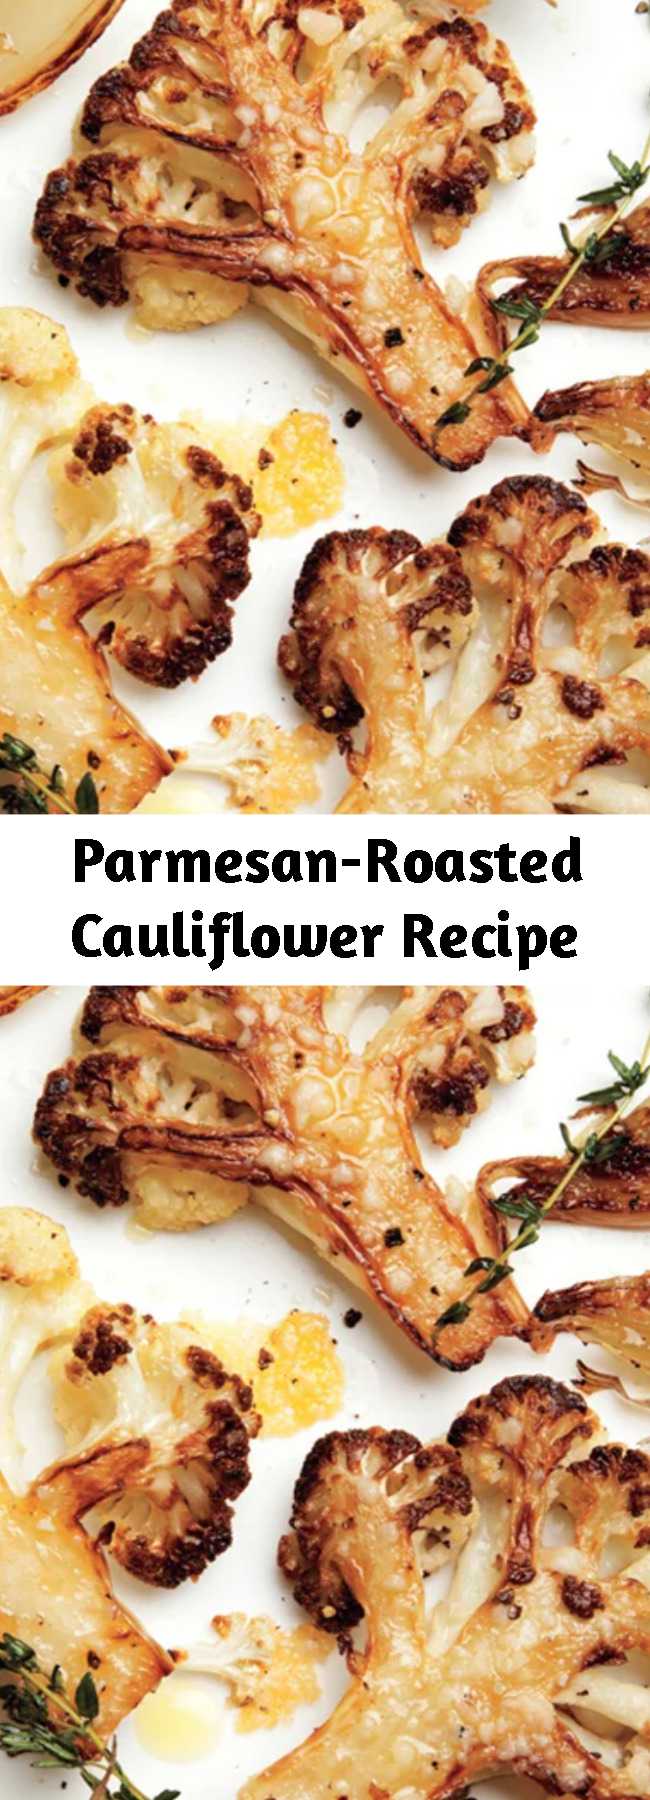 Parmesan-Roasted Cauliflower Recipe - The combination of meaty, caramelized, roasted cauliflower florets and some just-this-side-of-burnt onions has become our go-to winter side dish recipe.